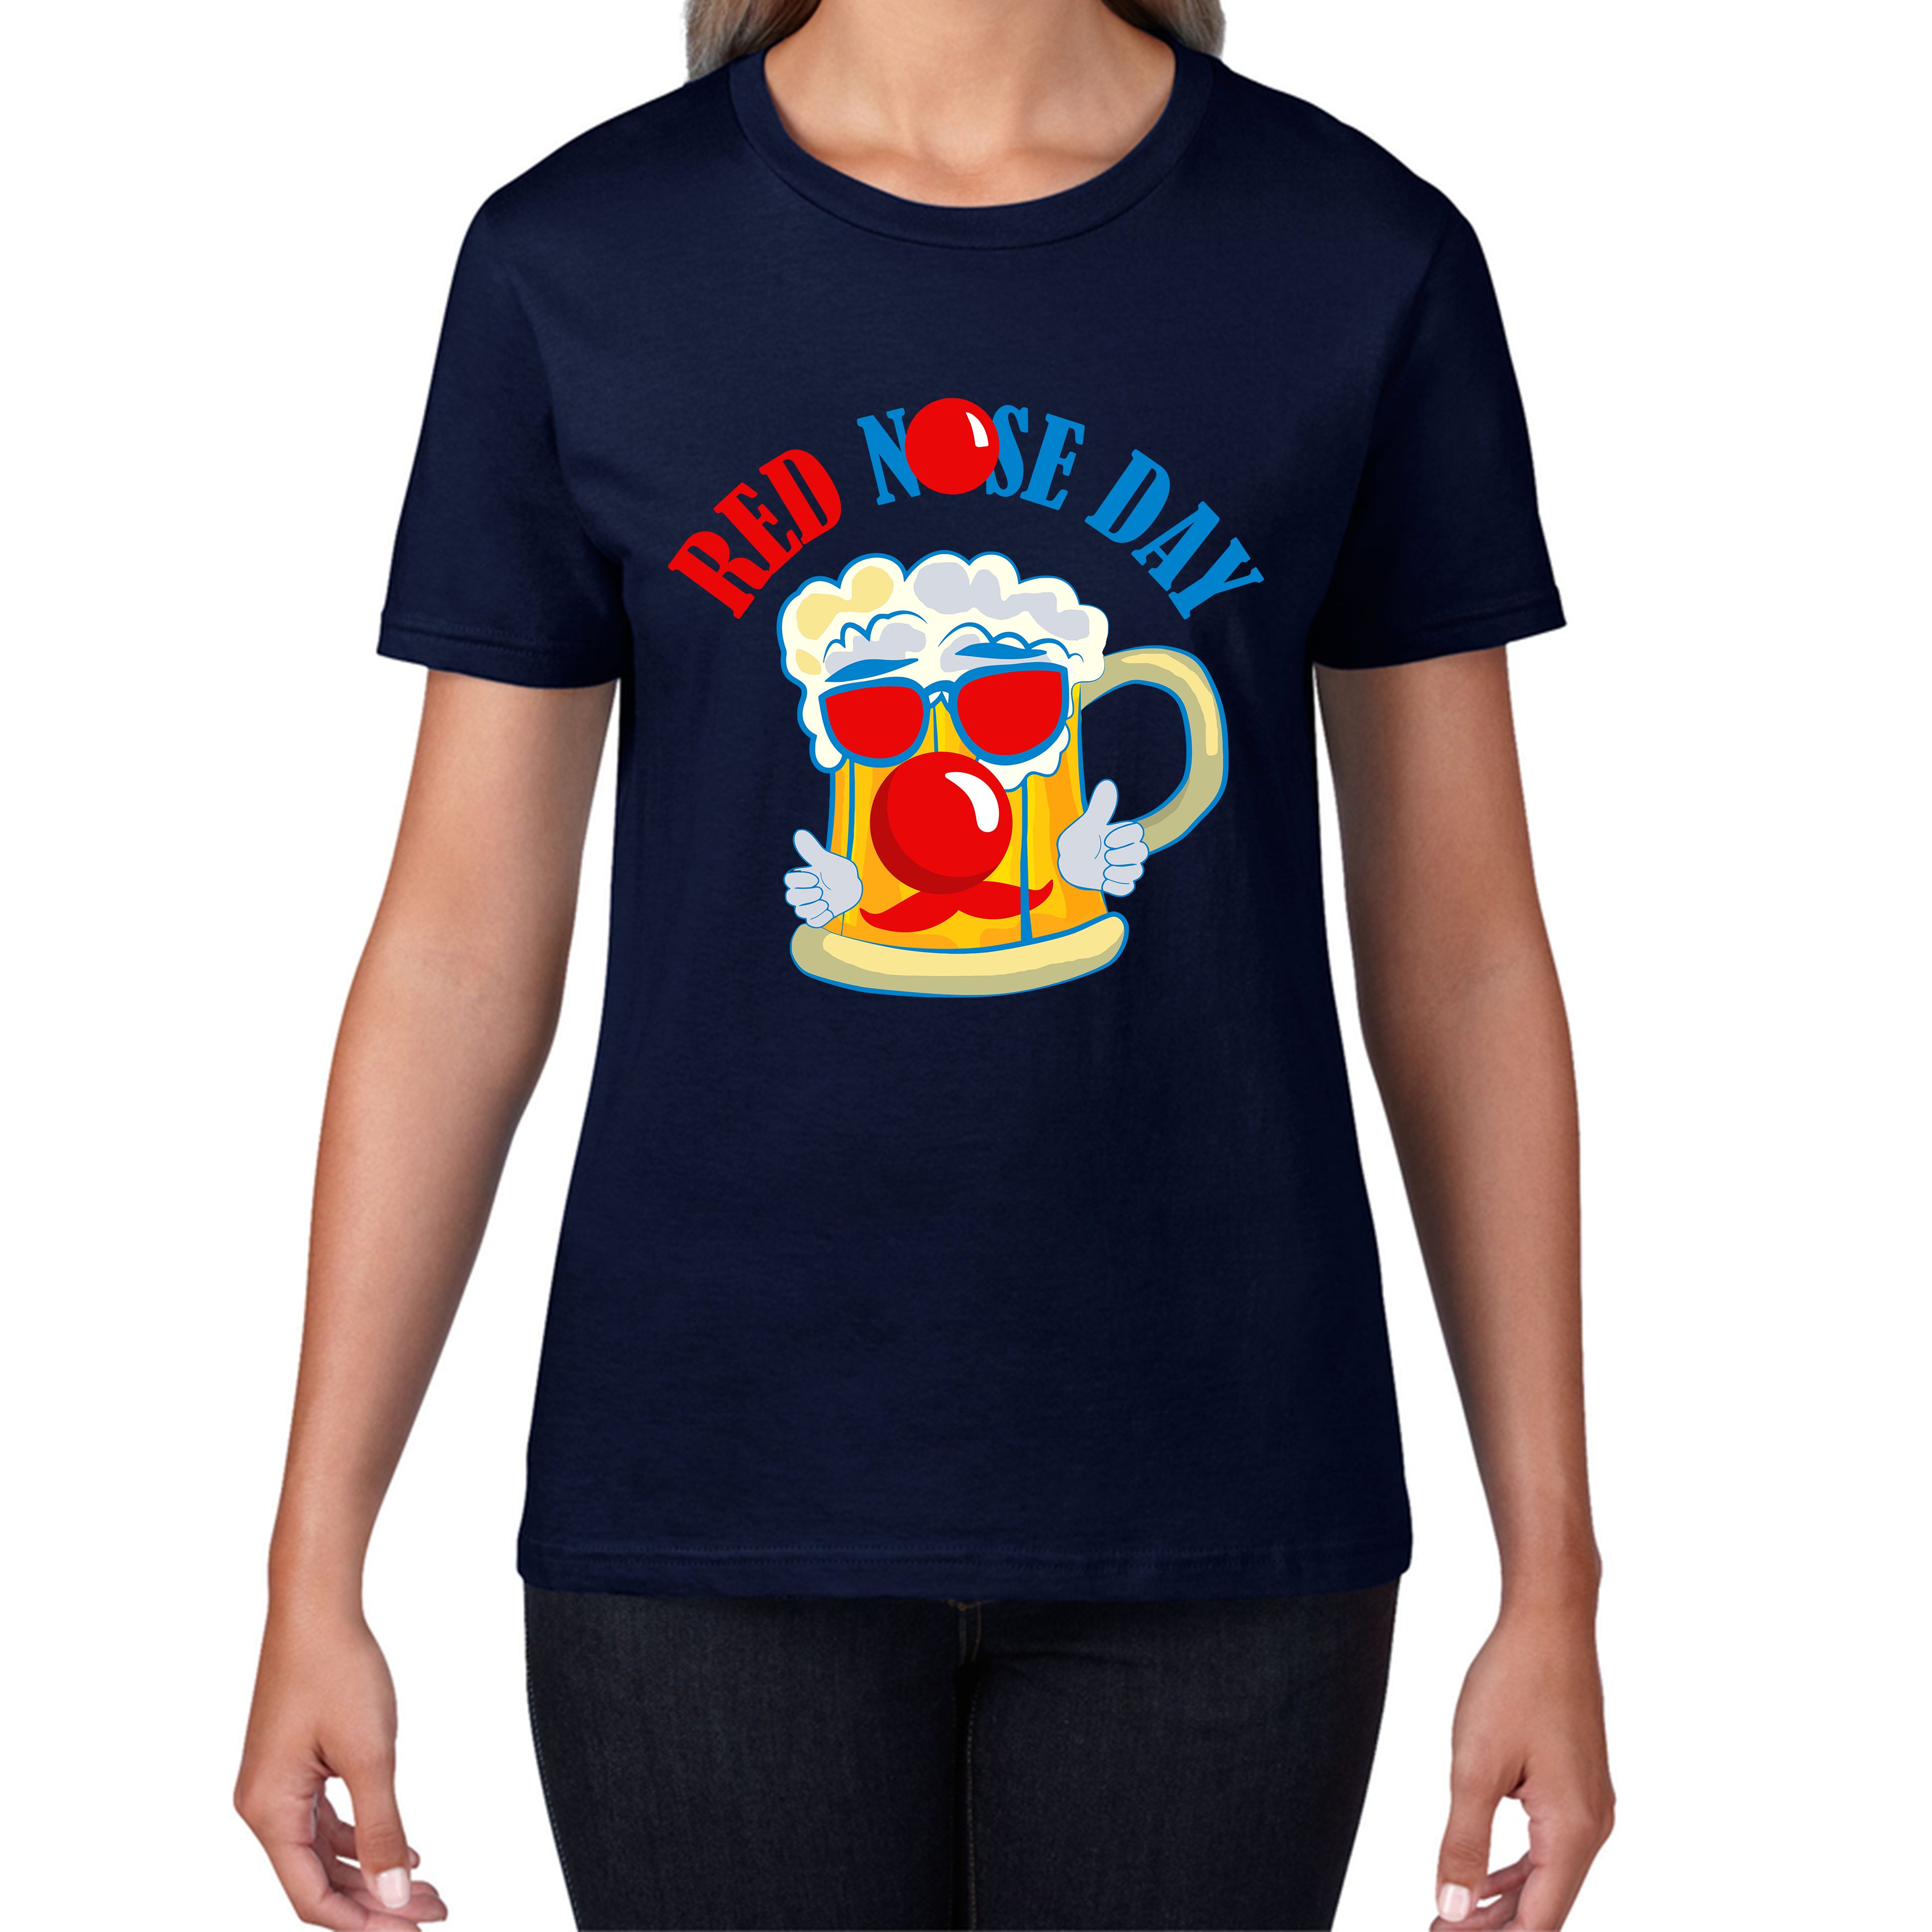 Beer Red Nose Day Funny Ladies T Shirt. 50% Goes To Charity